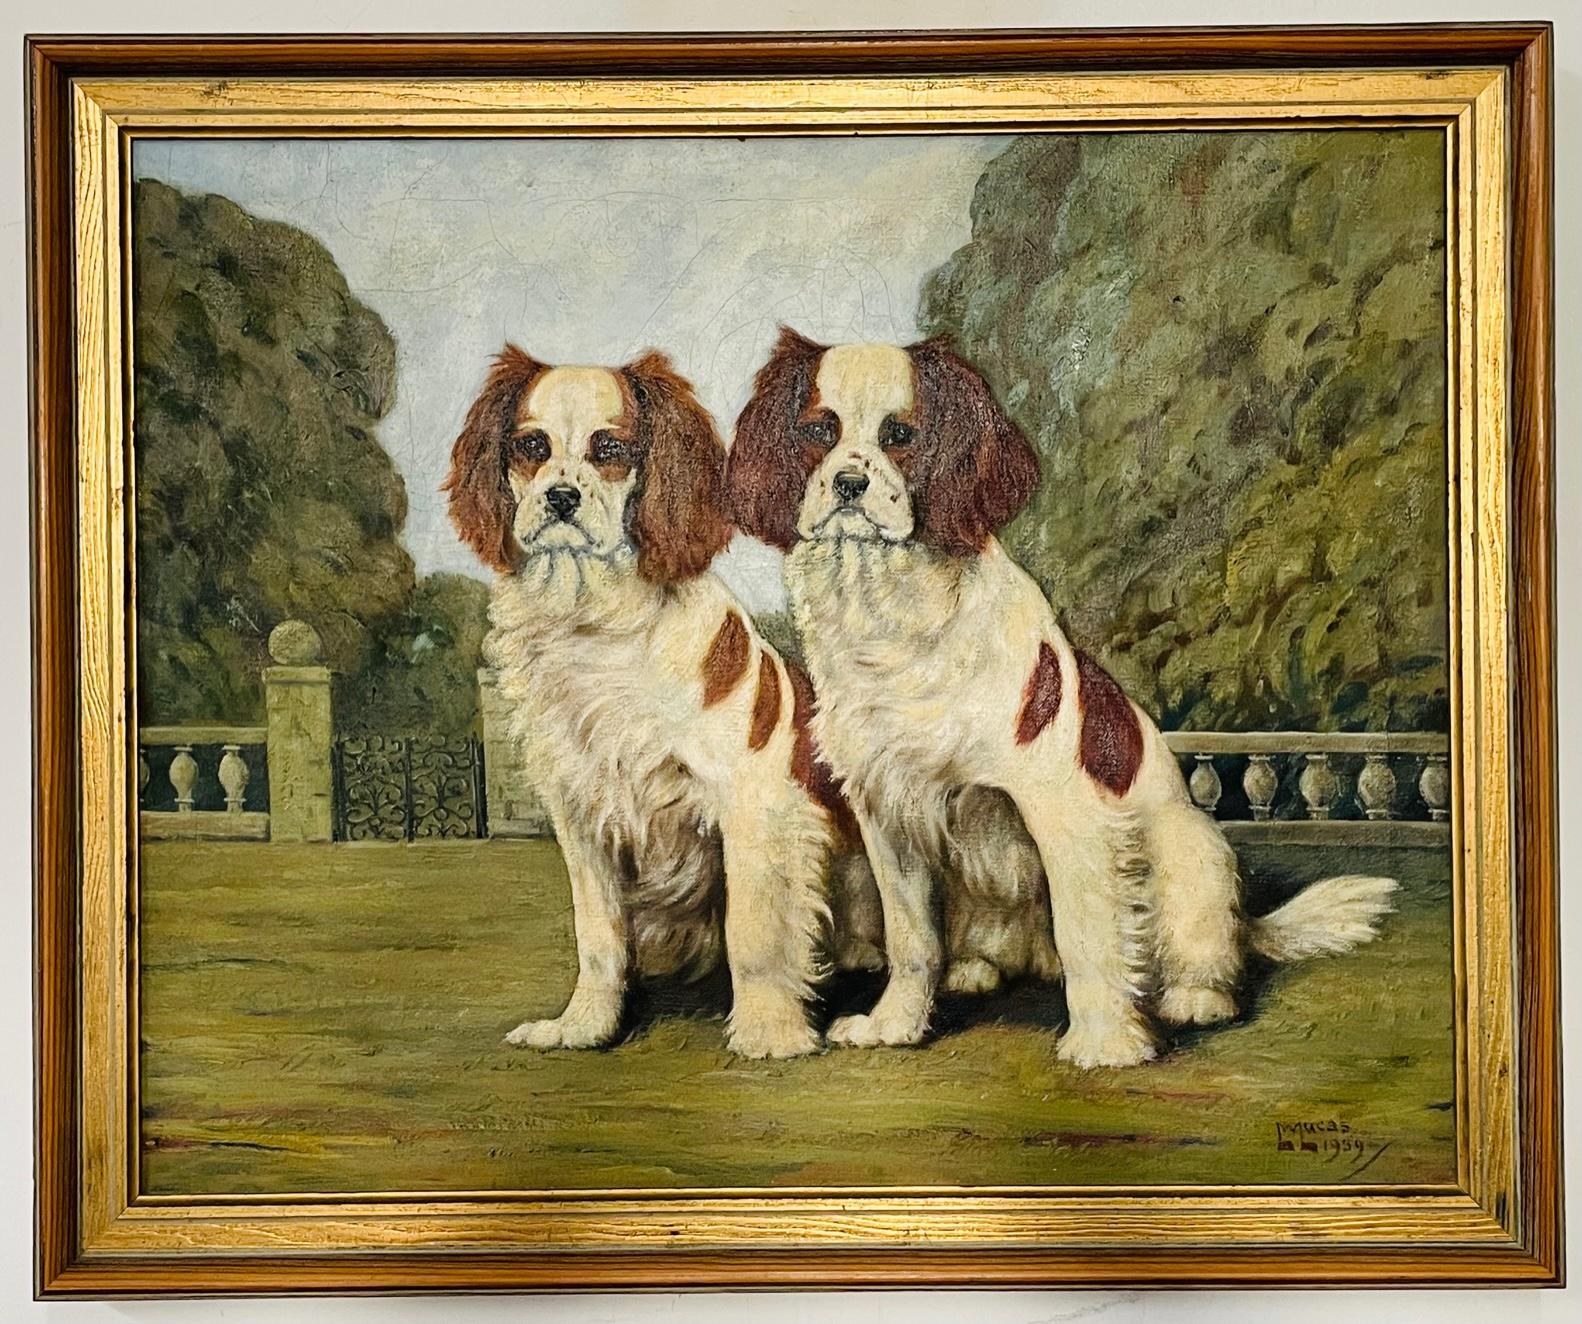 A lovely portrait of a pair of cavalier King Charles Spaniel oil on canvas portrait painting standing in what it looks like a terrace or home garden and rendered in the style of Otto eerelman ( Dutch -1839-1926).
The painting is signed by. Artist 